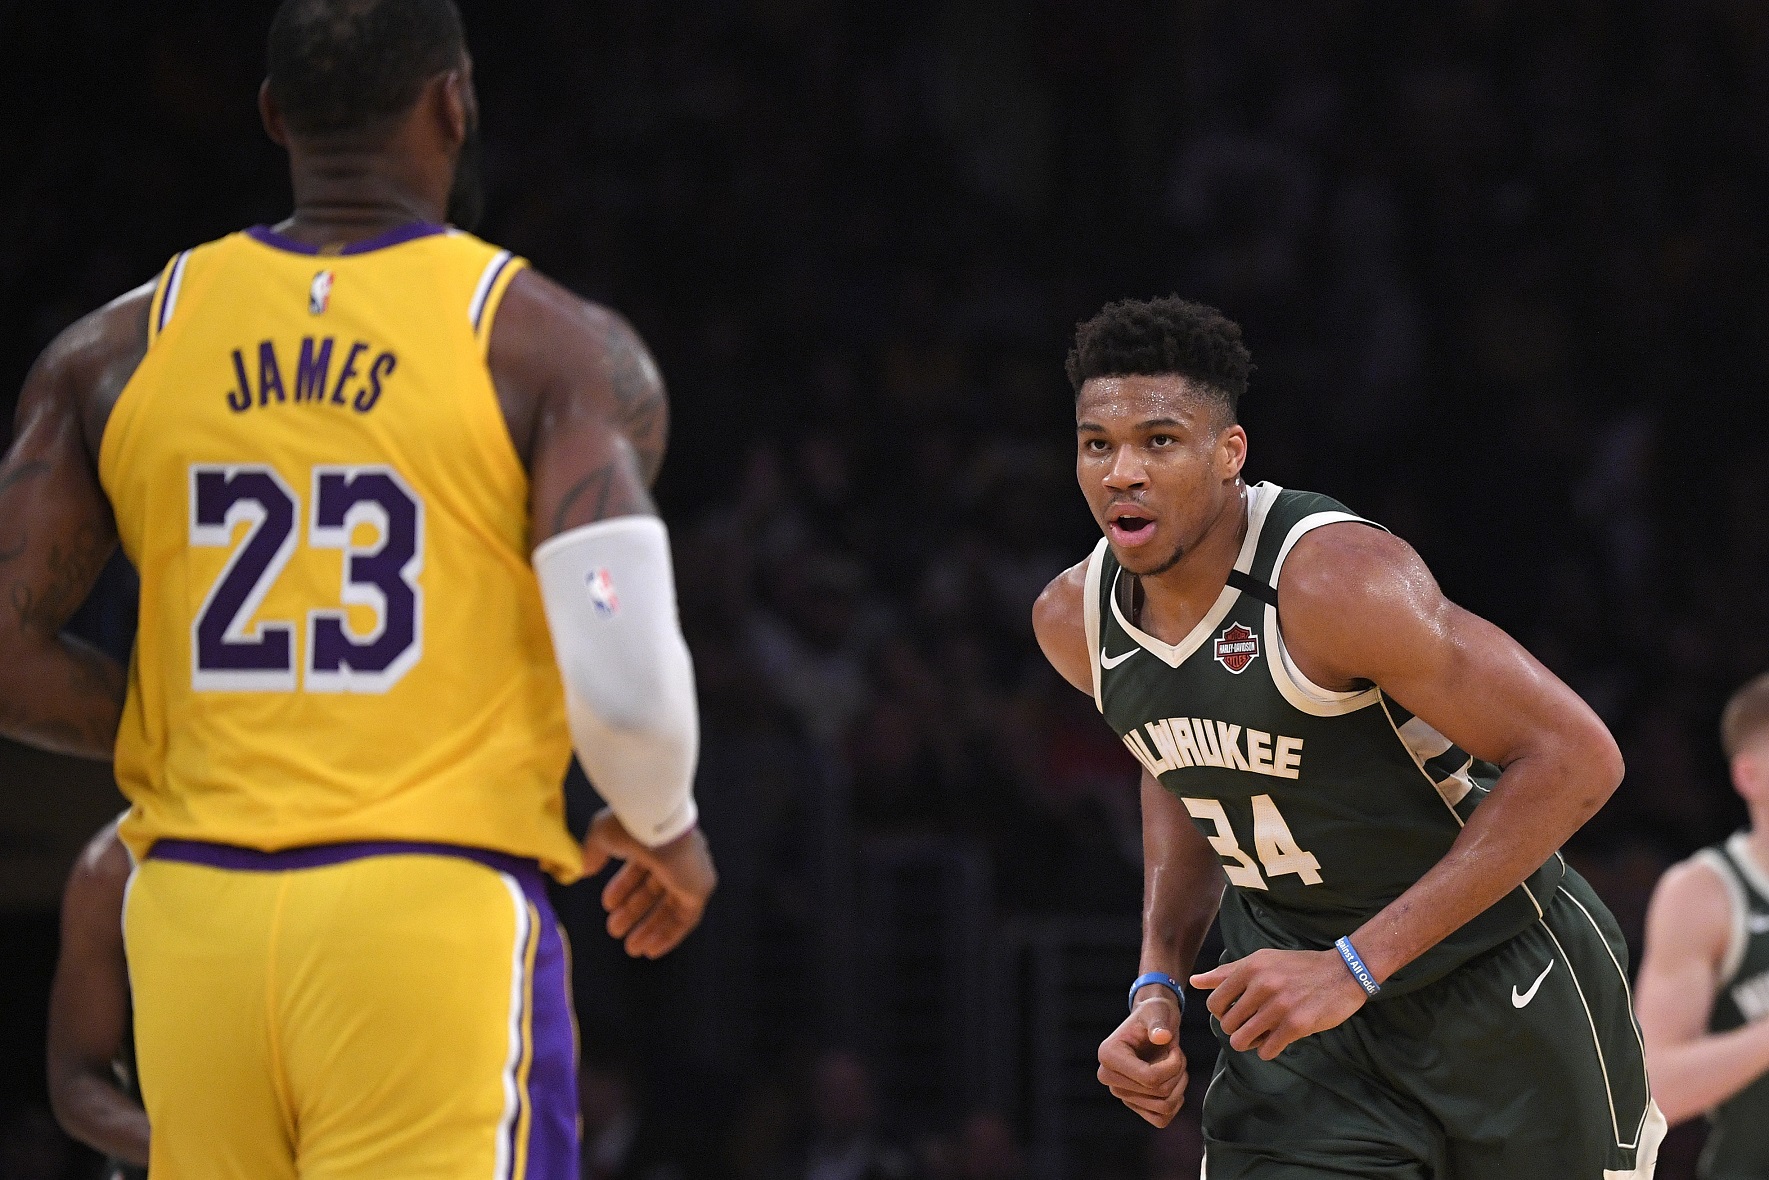 Back to work: Bucks, Lakers again try to get to second round